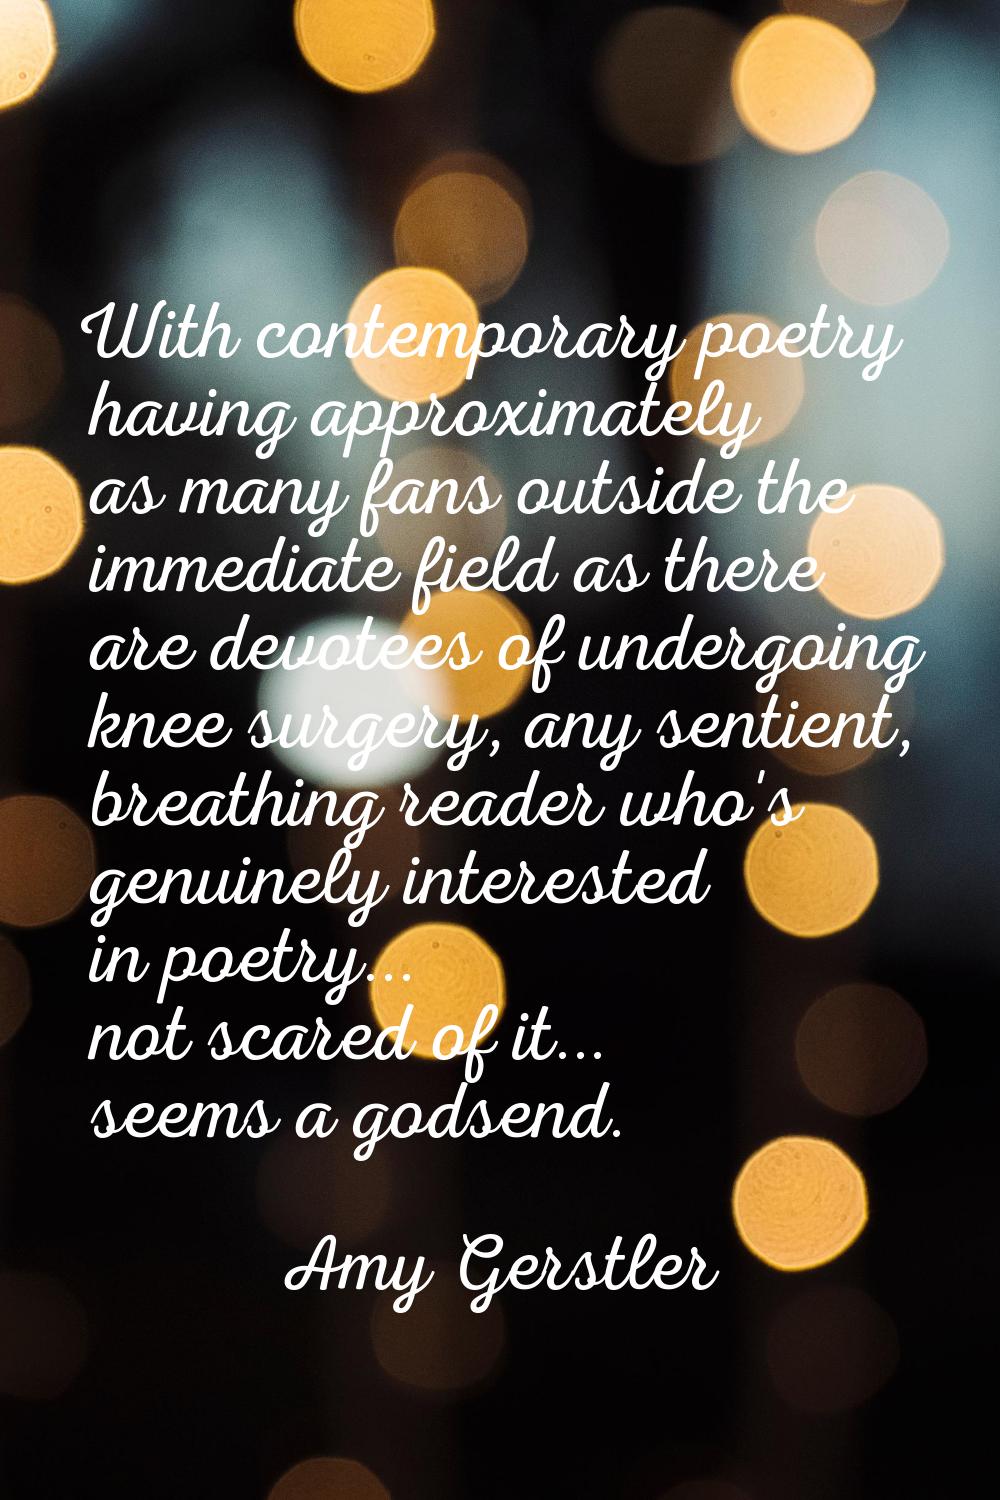 With contemporary poetry having approximately as many fans outside the immediate field as there are